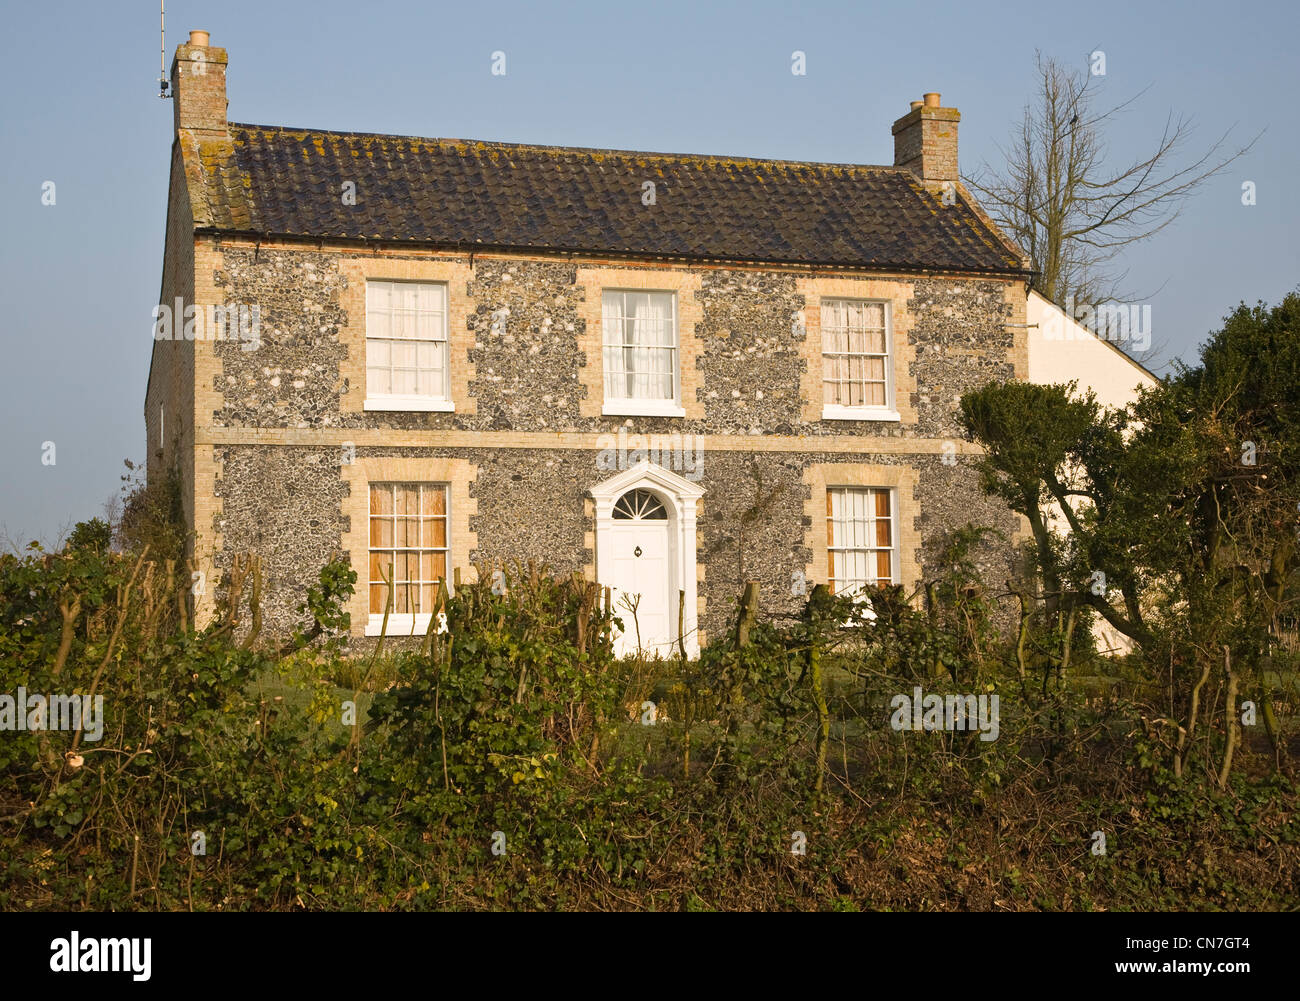 Detached country house Great Glemham, Suffolk, England Stock Photo